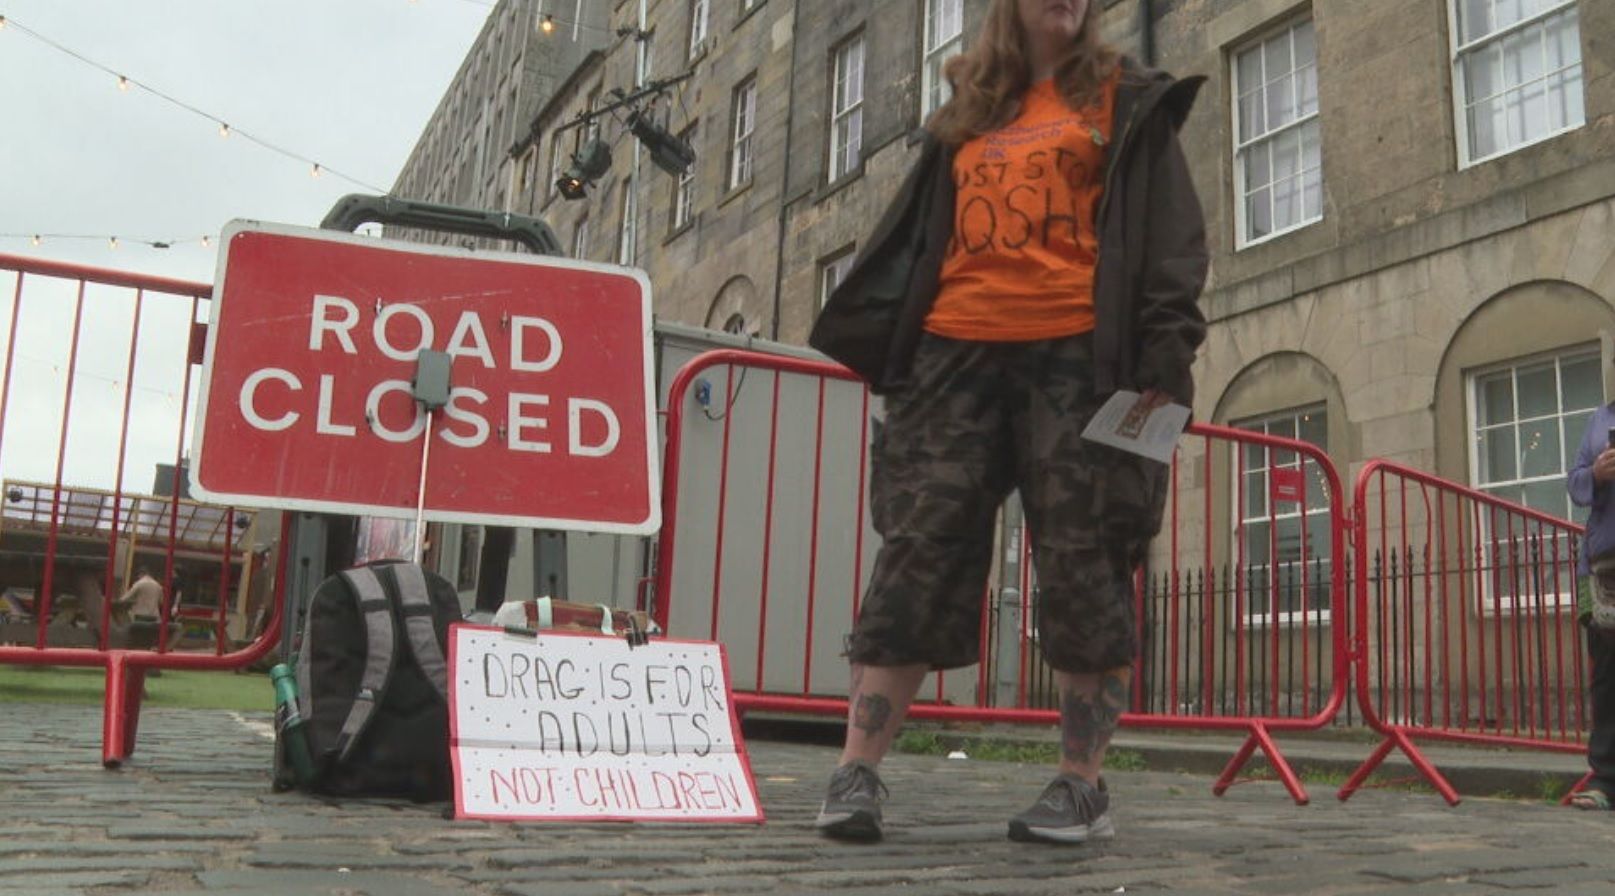 Protesters have been targeting drag shows at the Fringe